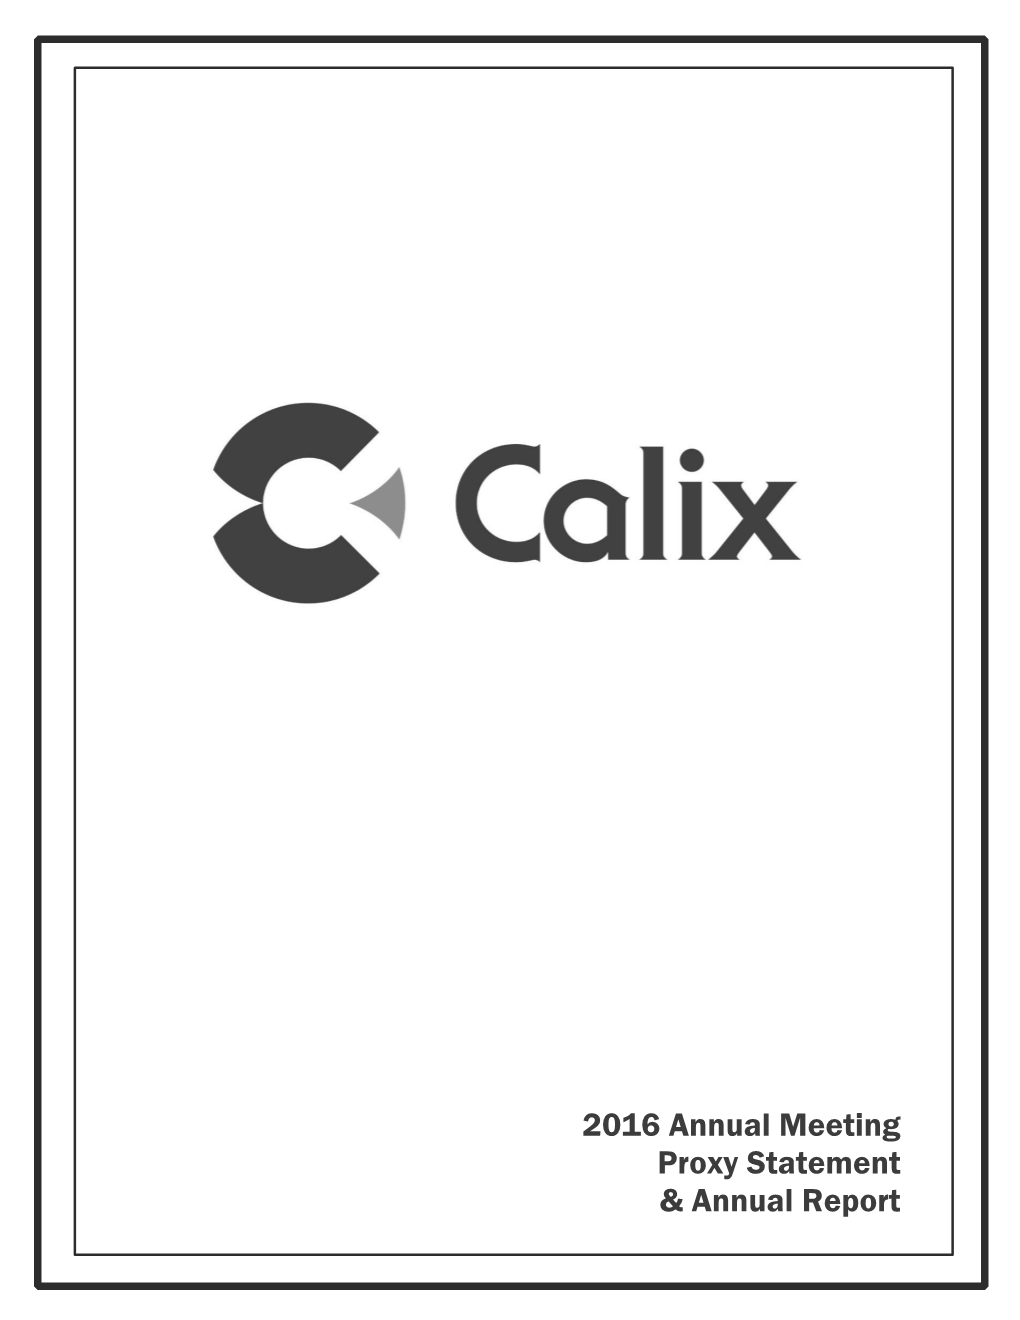 2016 Annual Meeting Proxy Statement & Annual Report